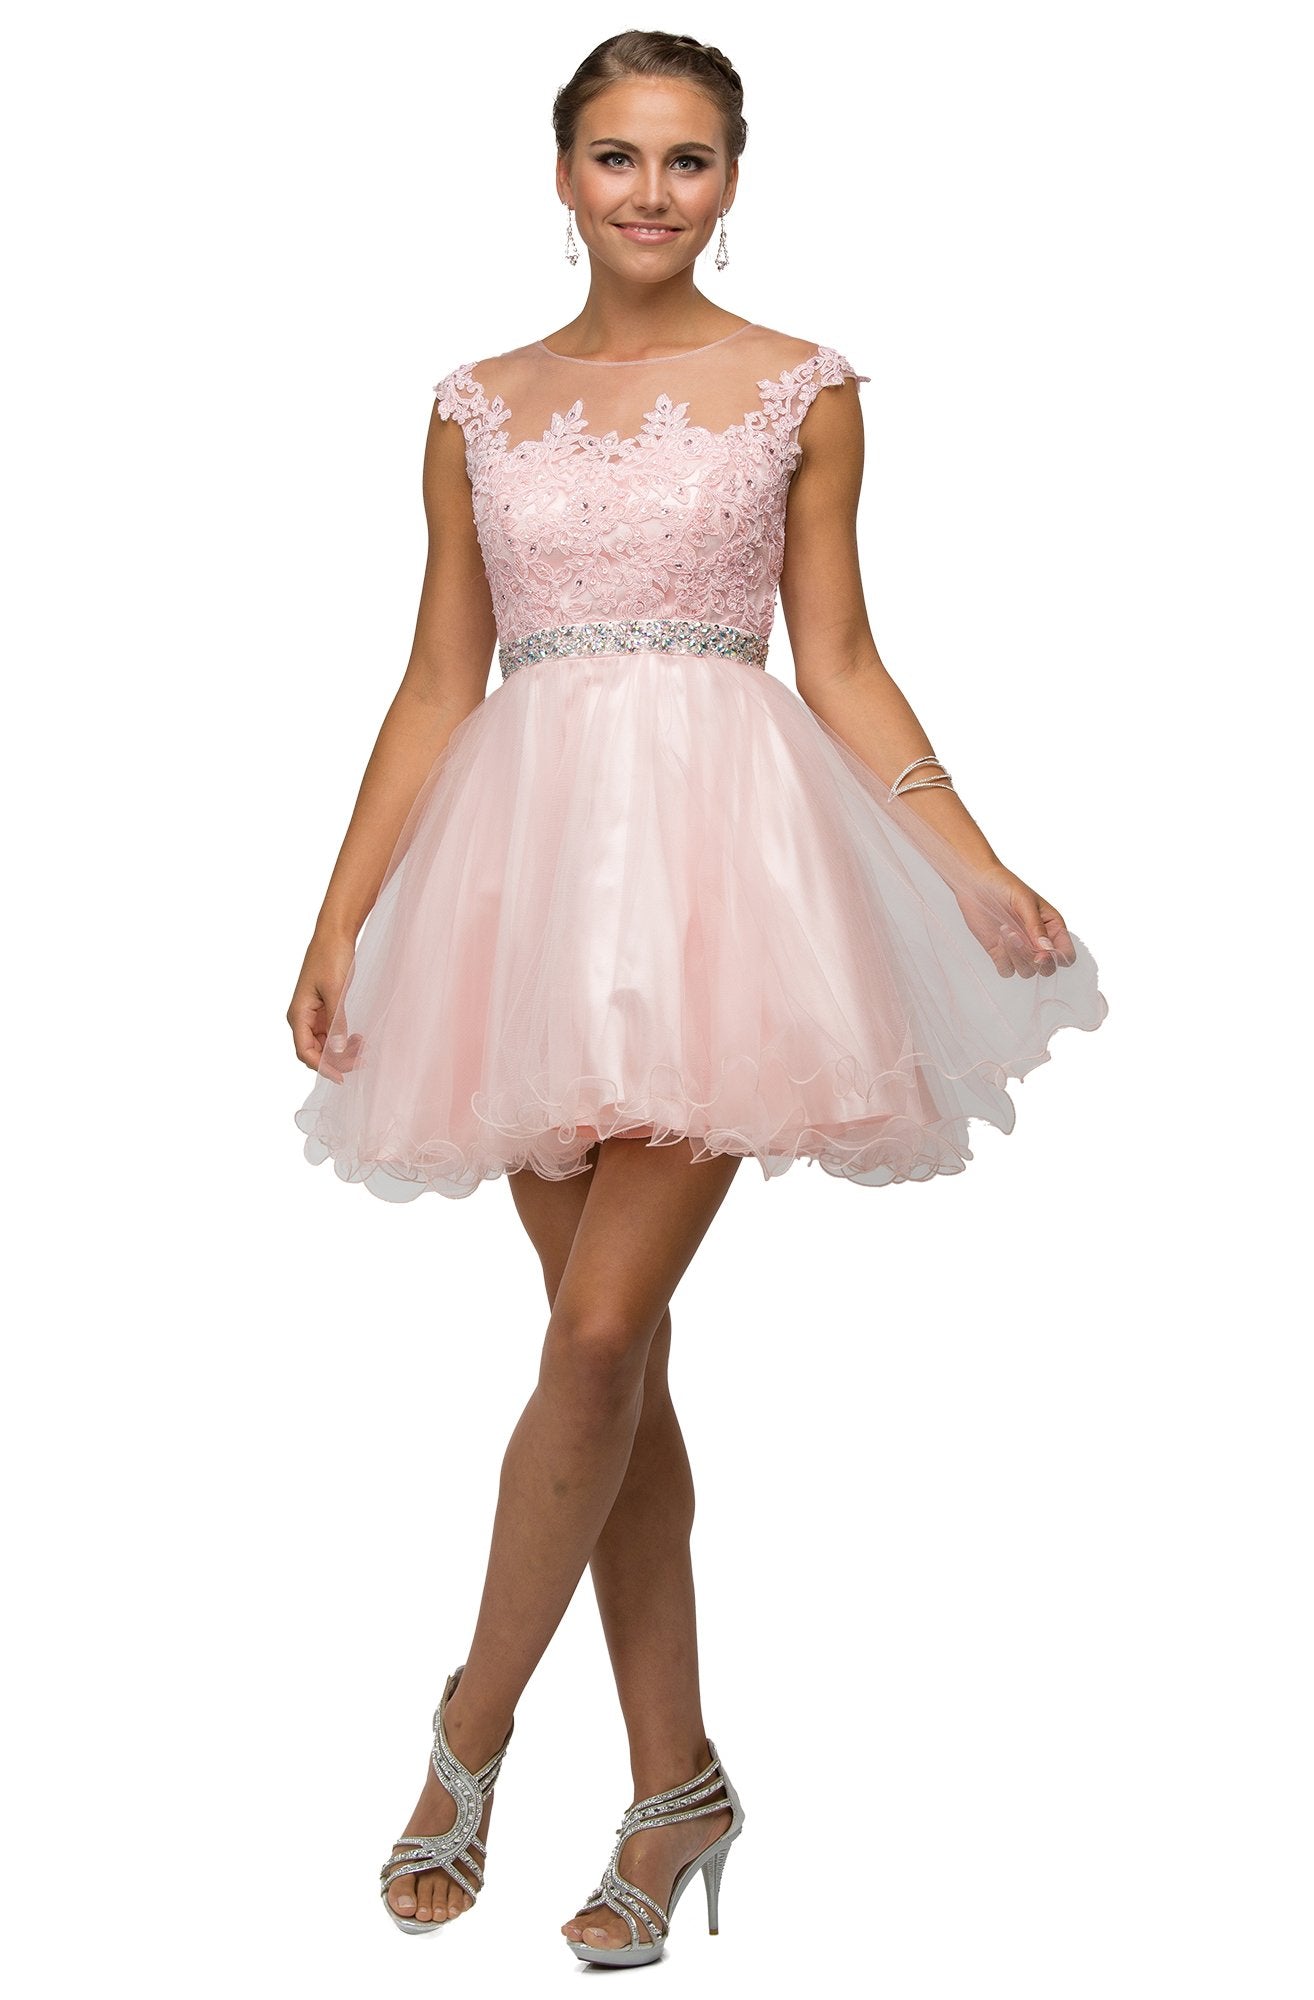 Dancing Queen - 9489 Lace Applique A-line Cocktail Dress In Pink